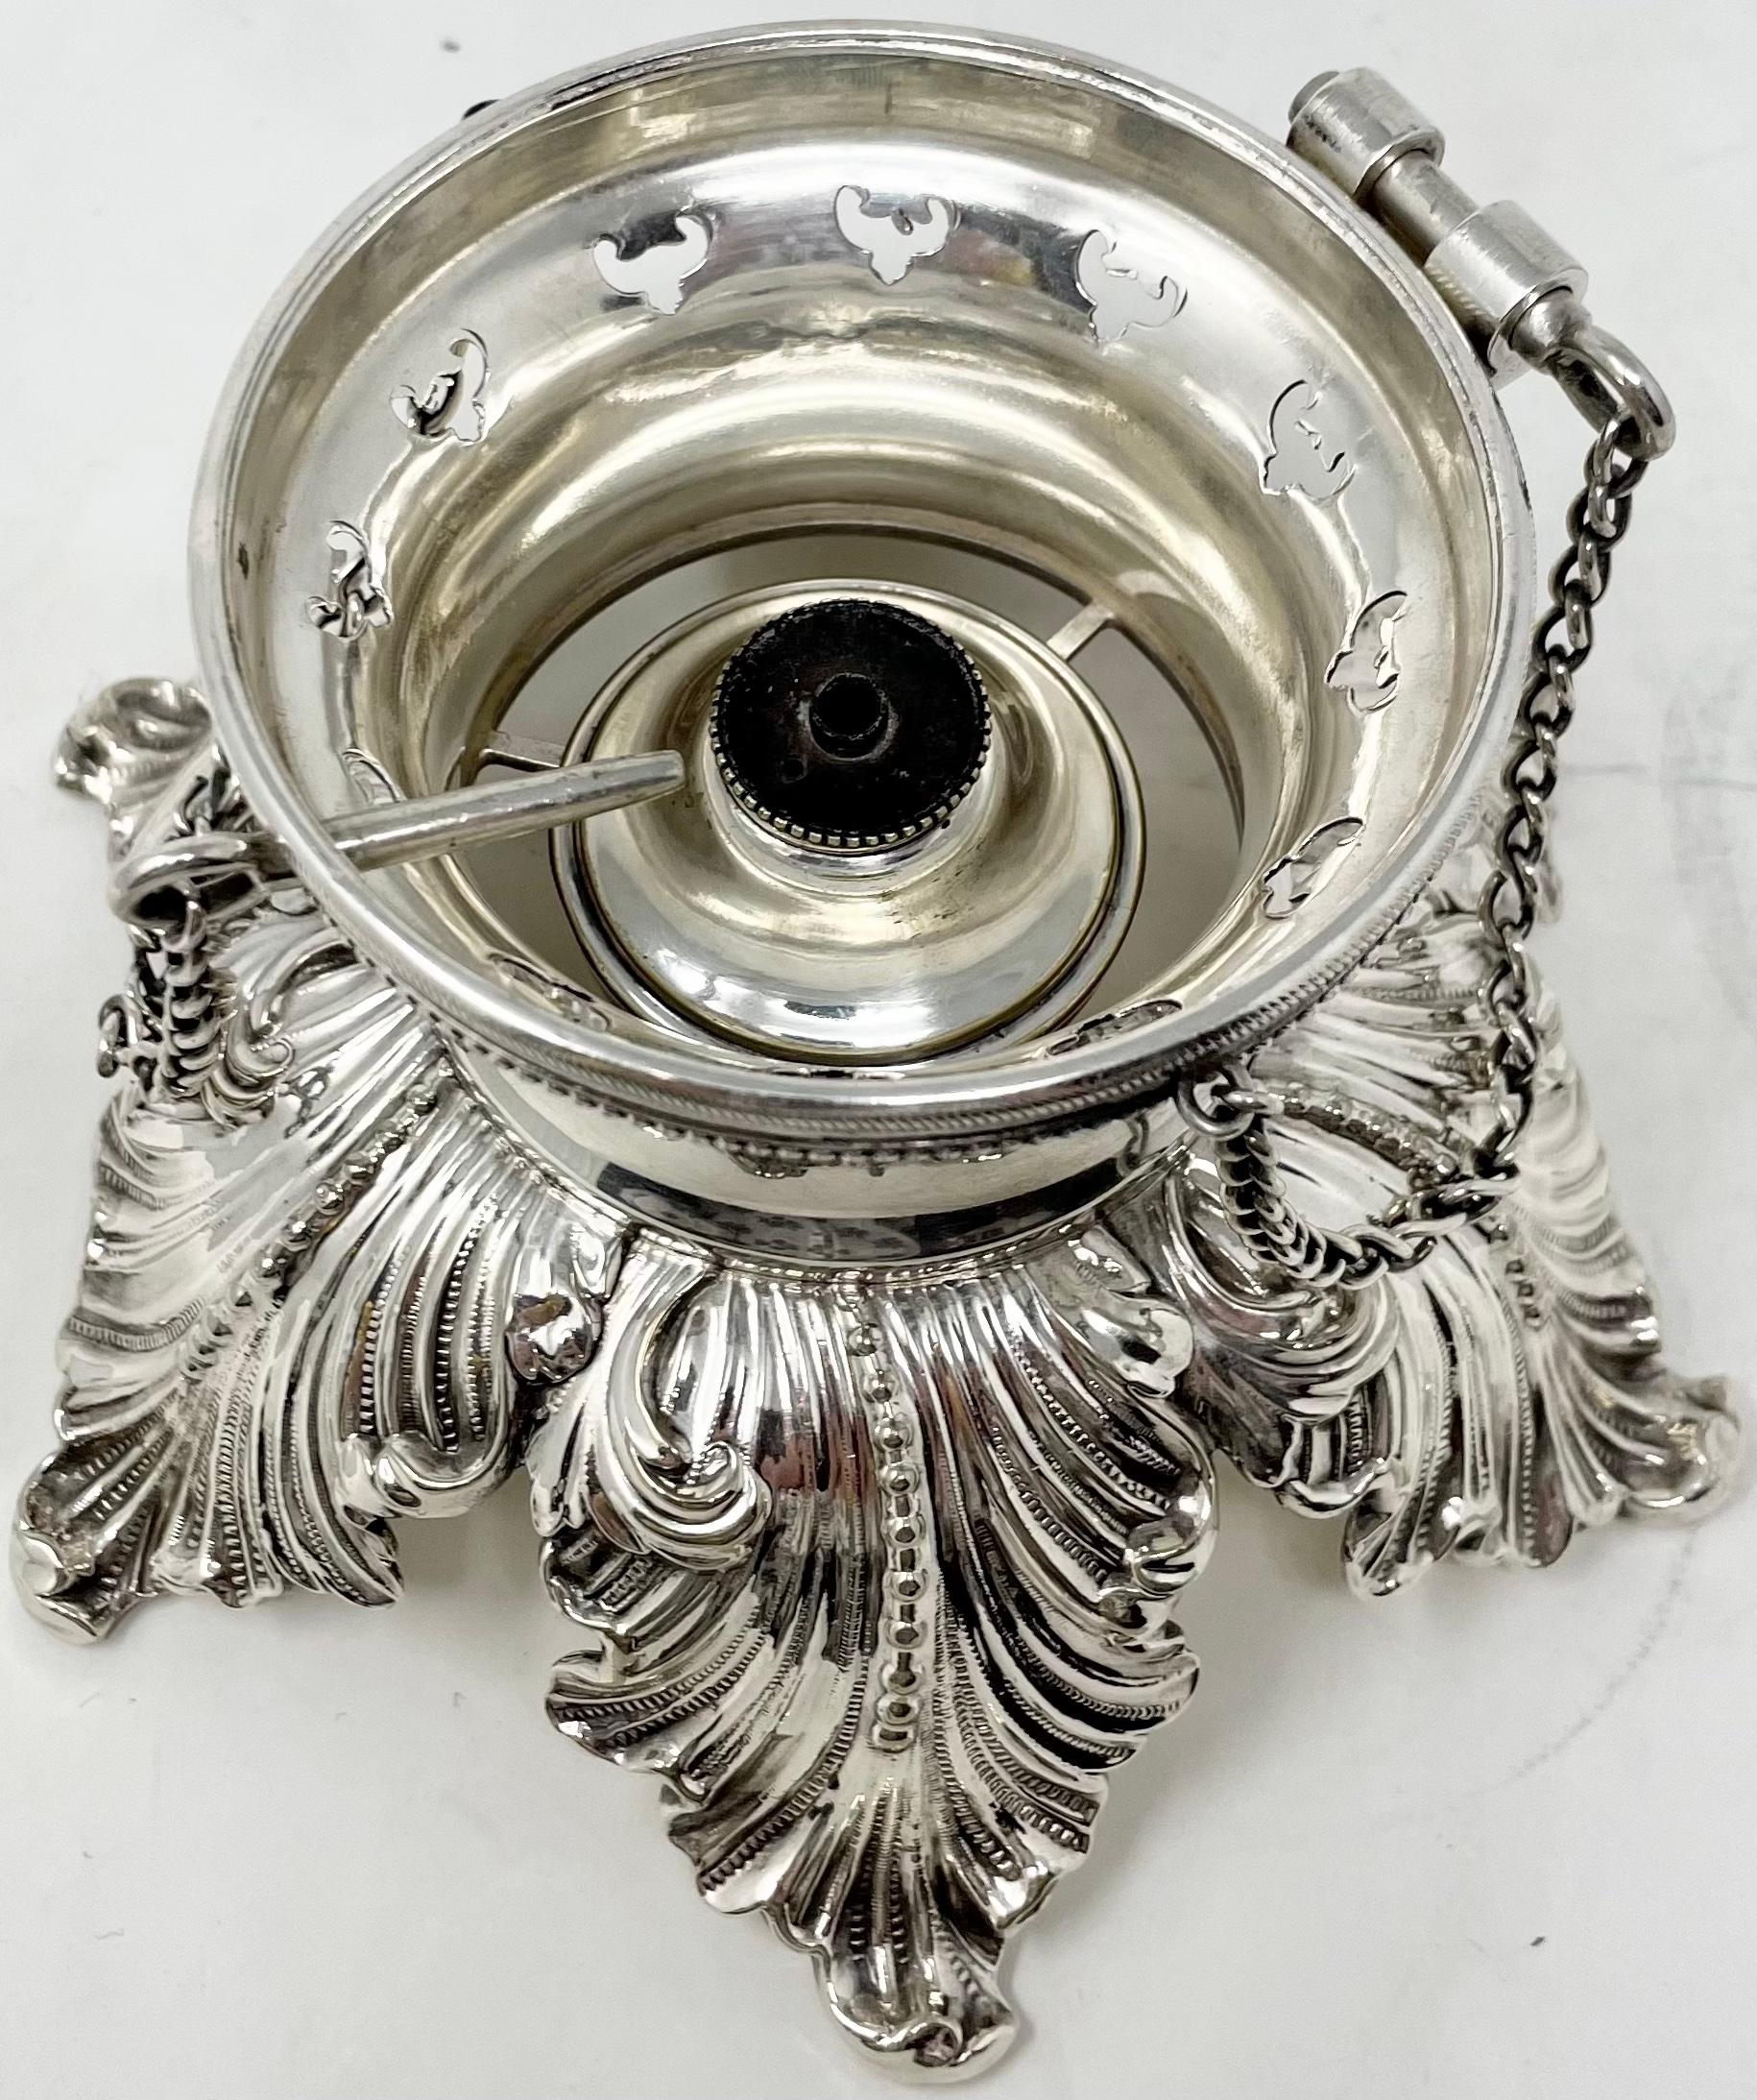 Antique English Sheffield Silver-Plate Footed Tea Pot with Etching, Circa 1860. For Sale 4